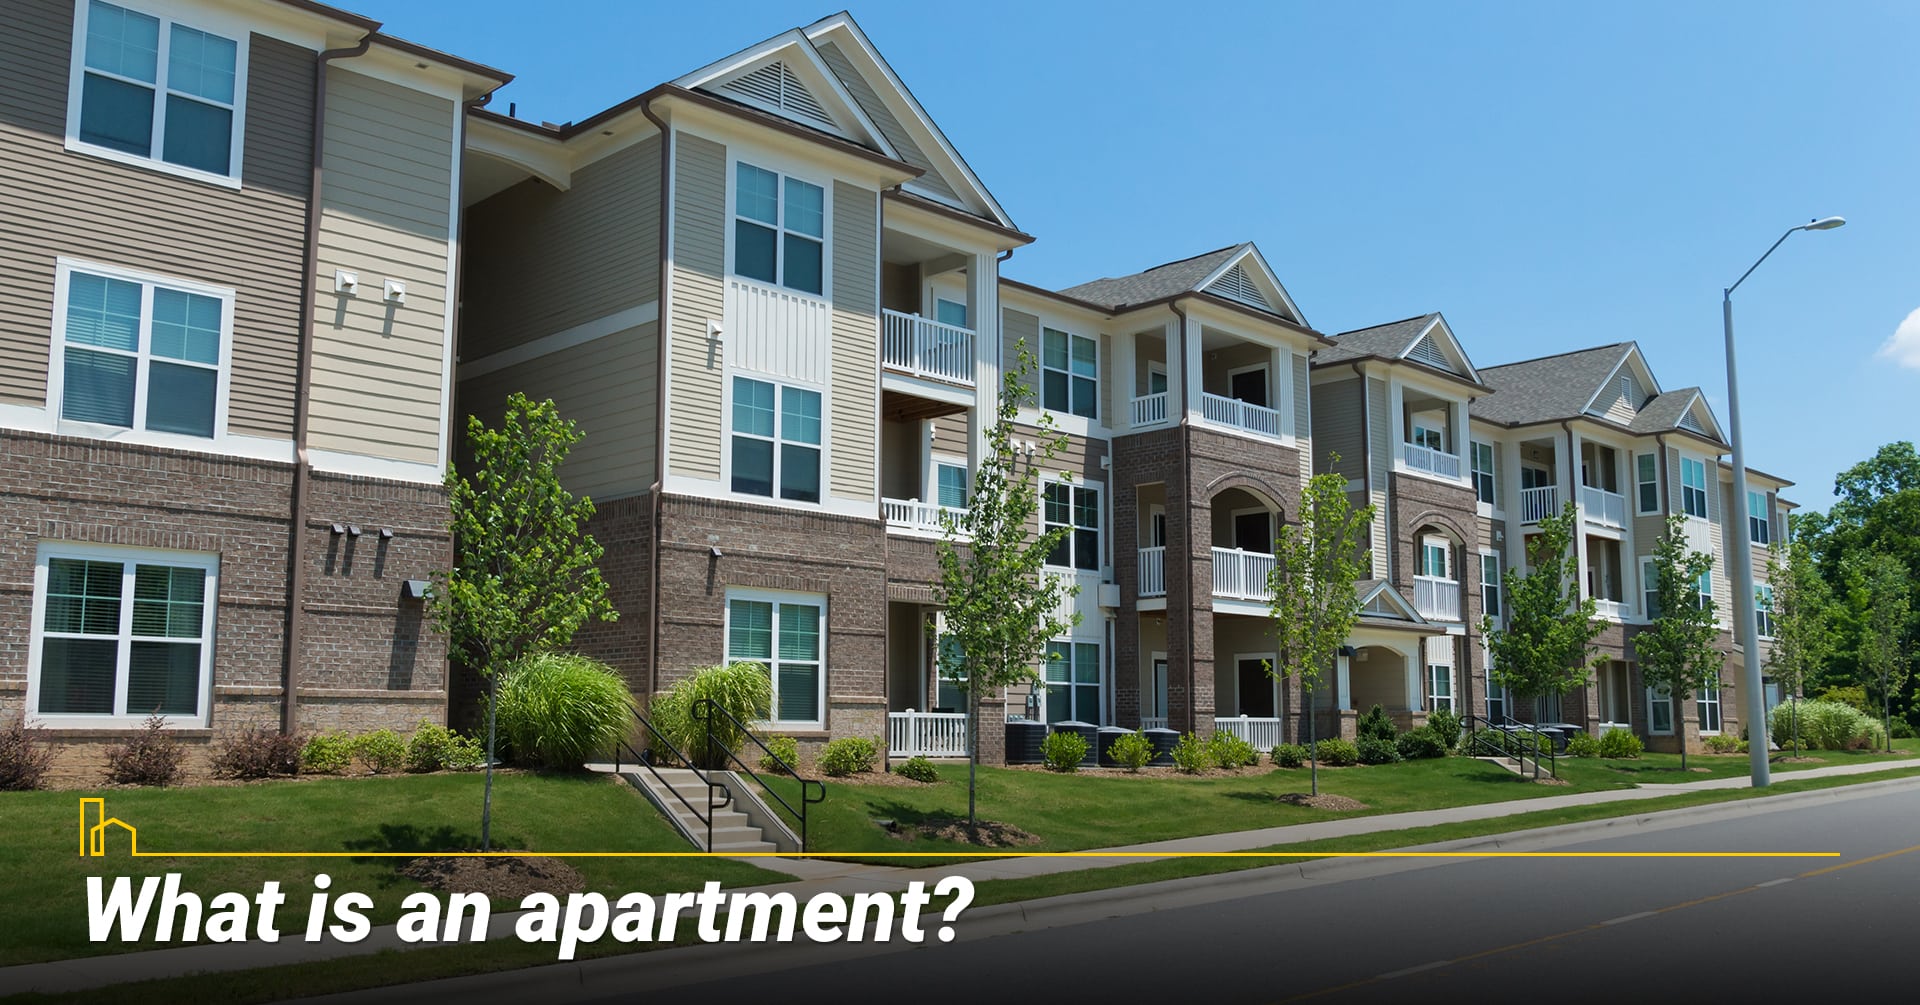 What is an apartment?